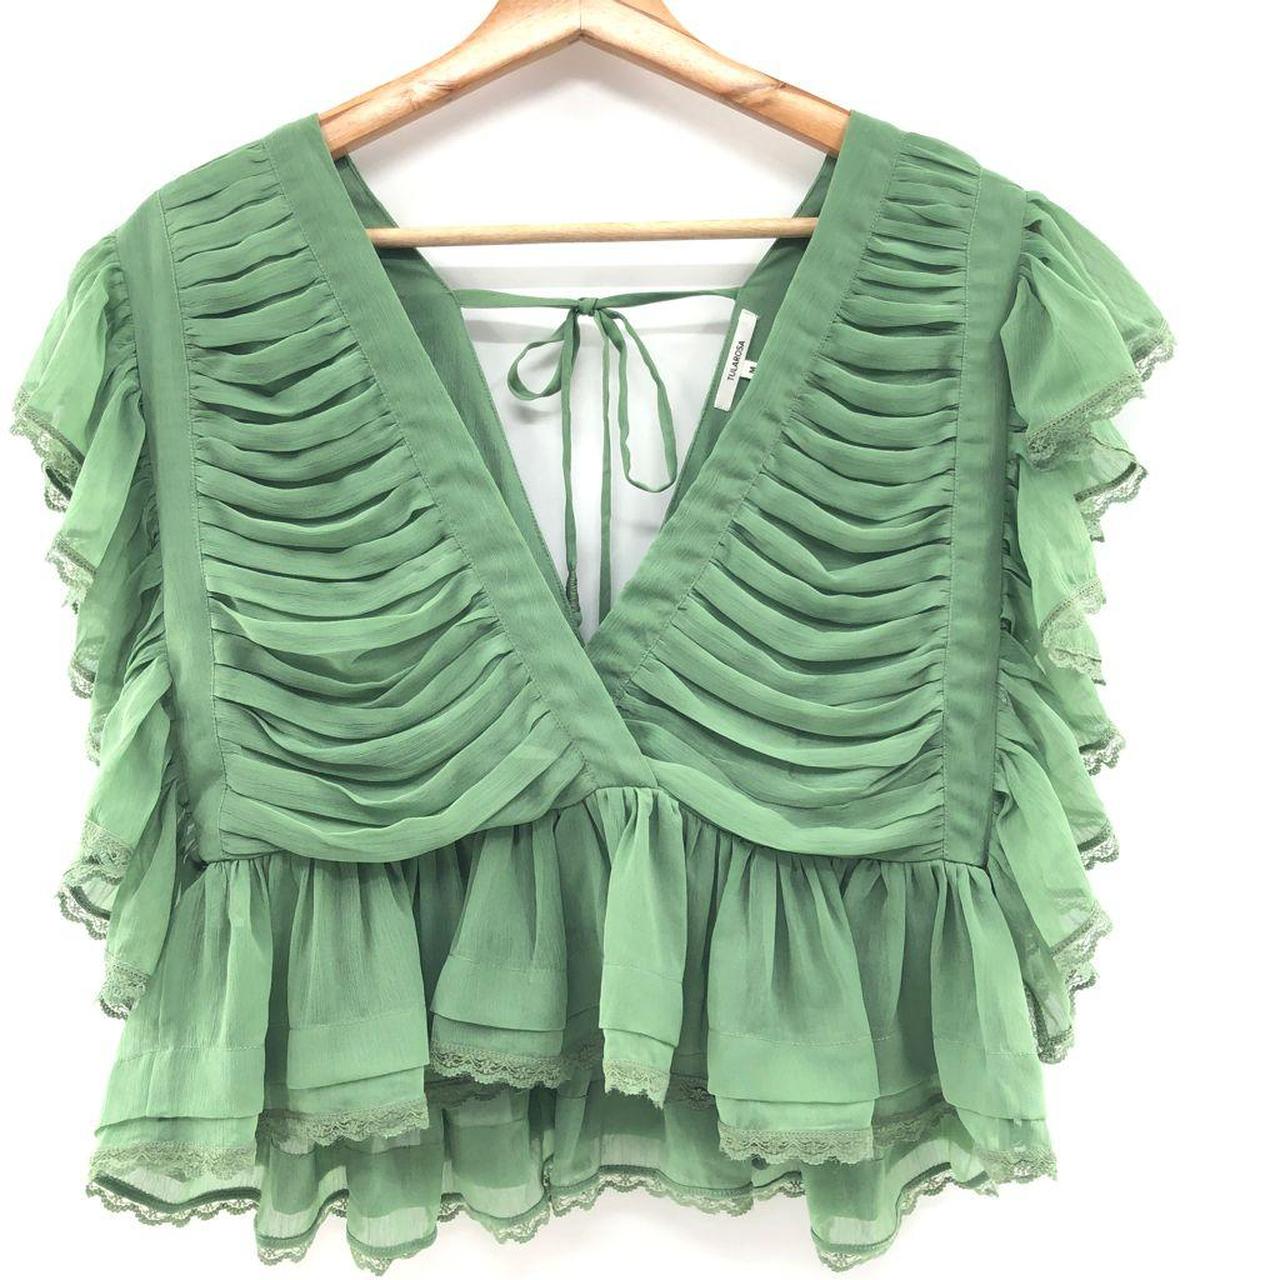 Product Image 2 - Tularosa Kaia Top in Mint
Size